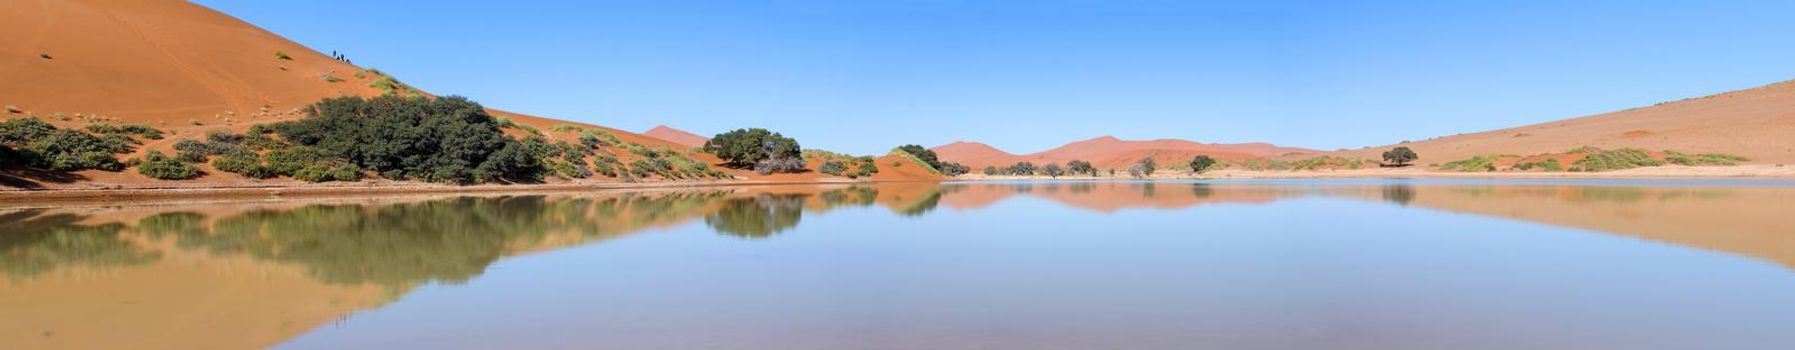 Panorama of Sossusvlei in Namibia full of water. Sand dunes are visible